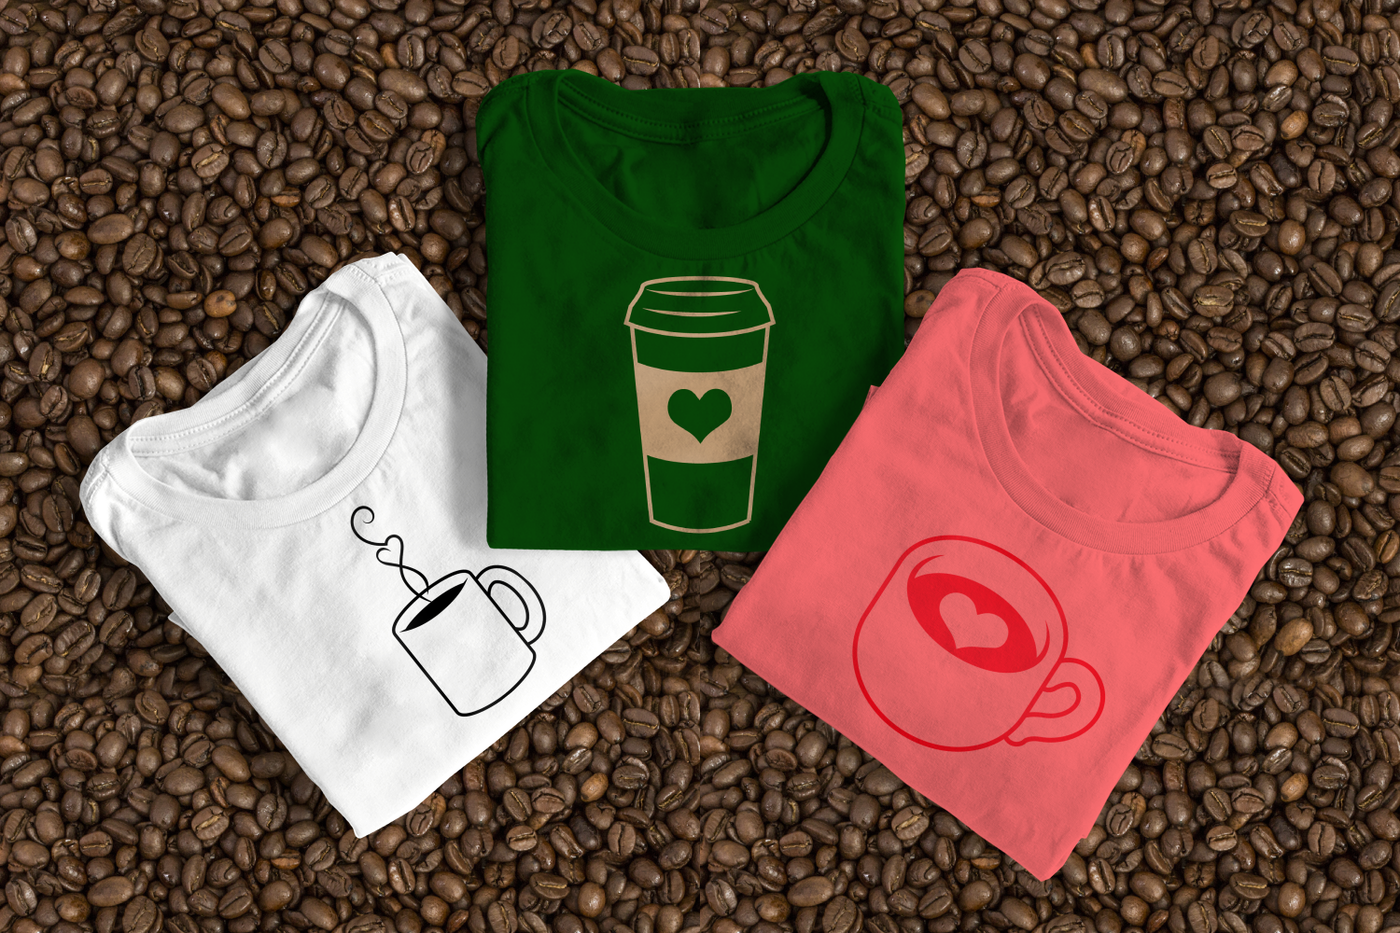 Three folded tees laying on some coffee beans. One has a coffee mug with heart steam, another is a coffee to go cup with a heart on the sleeve, and the last is a latte cup with a heart in the liquid.